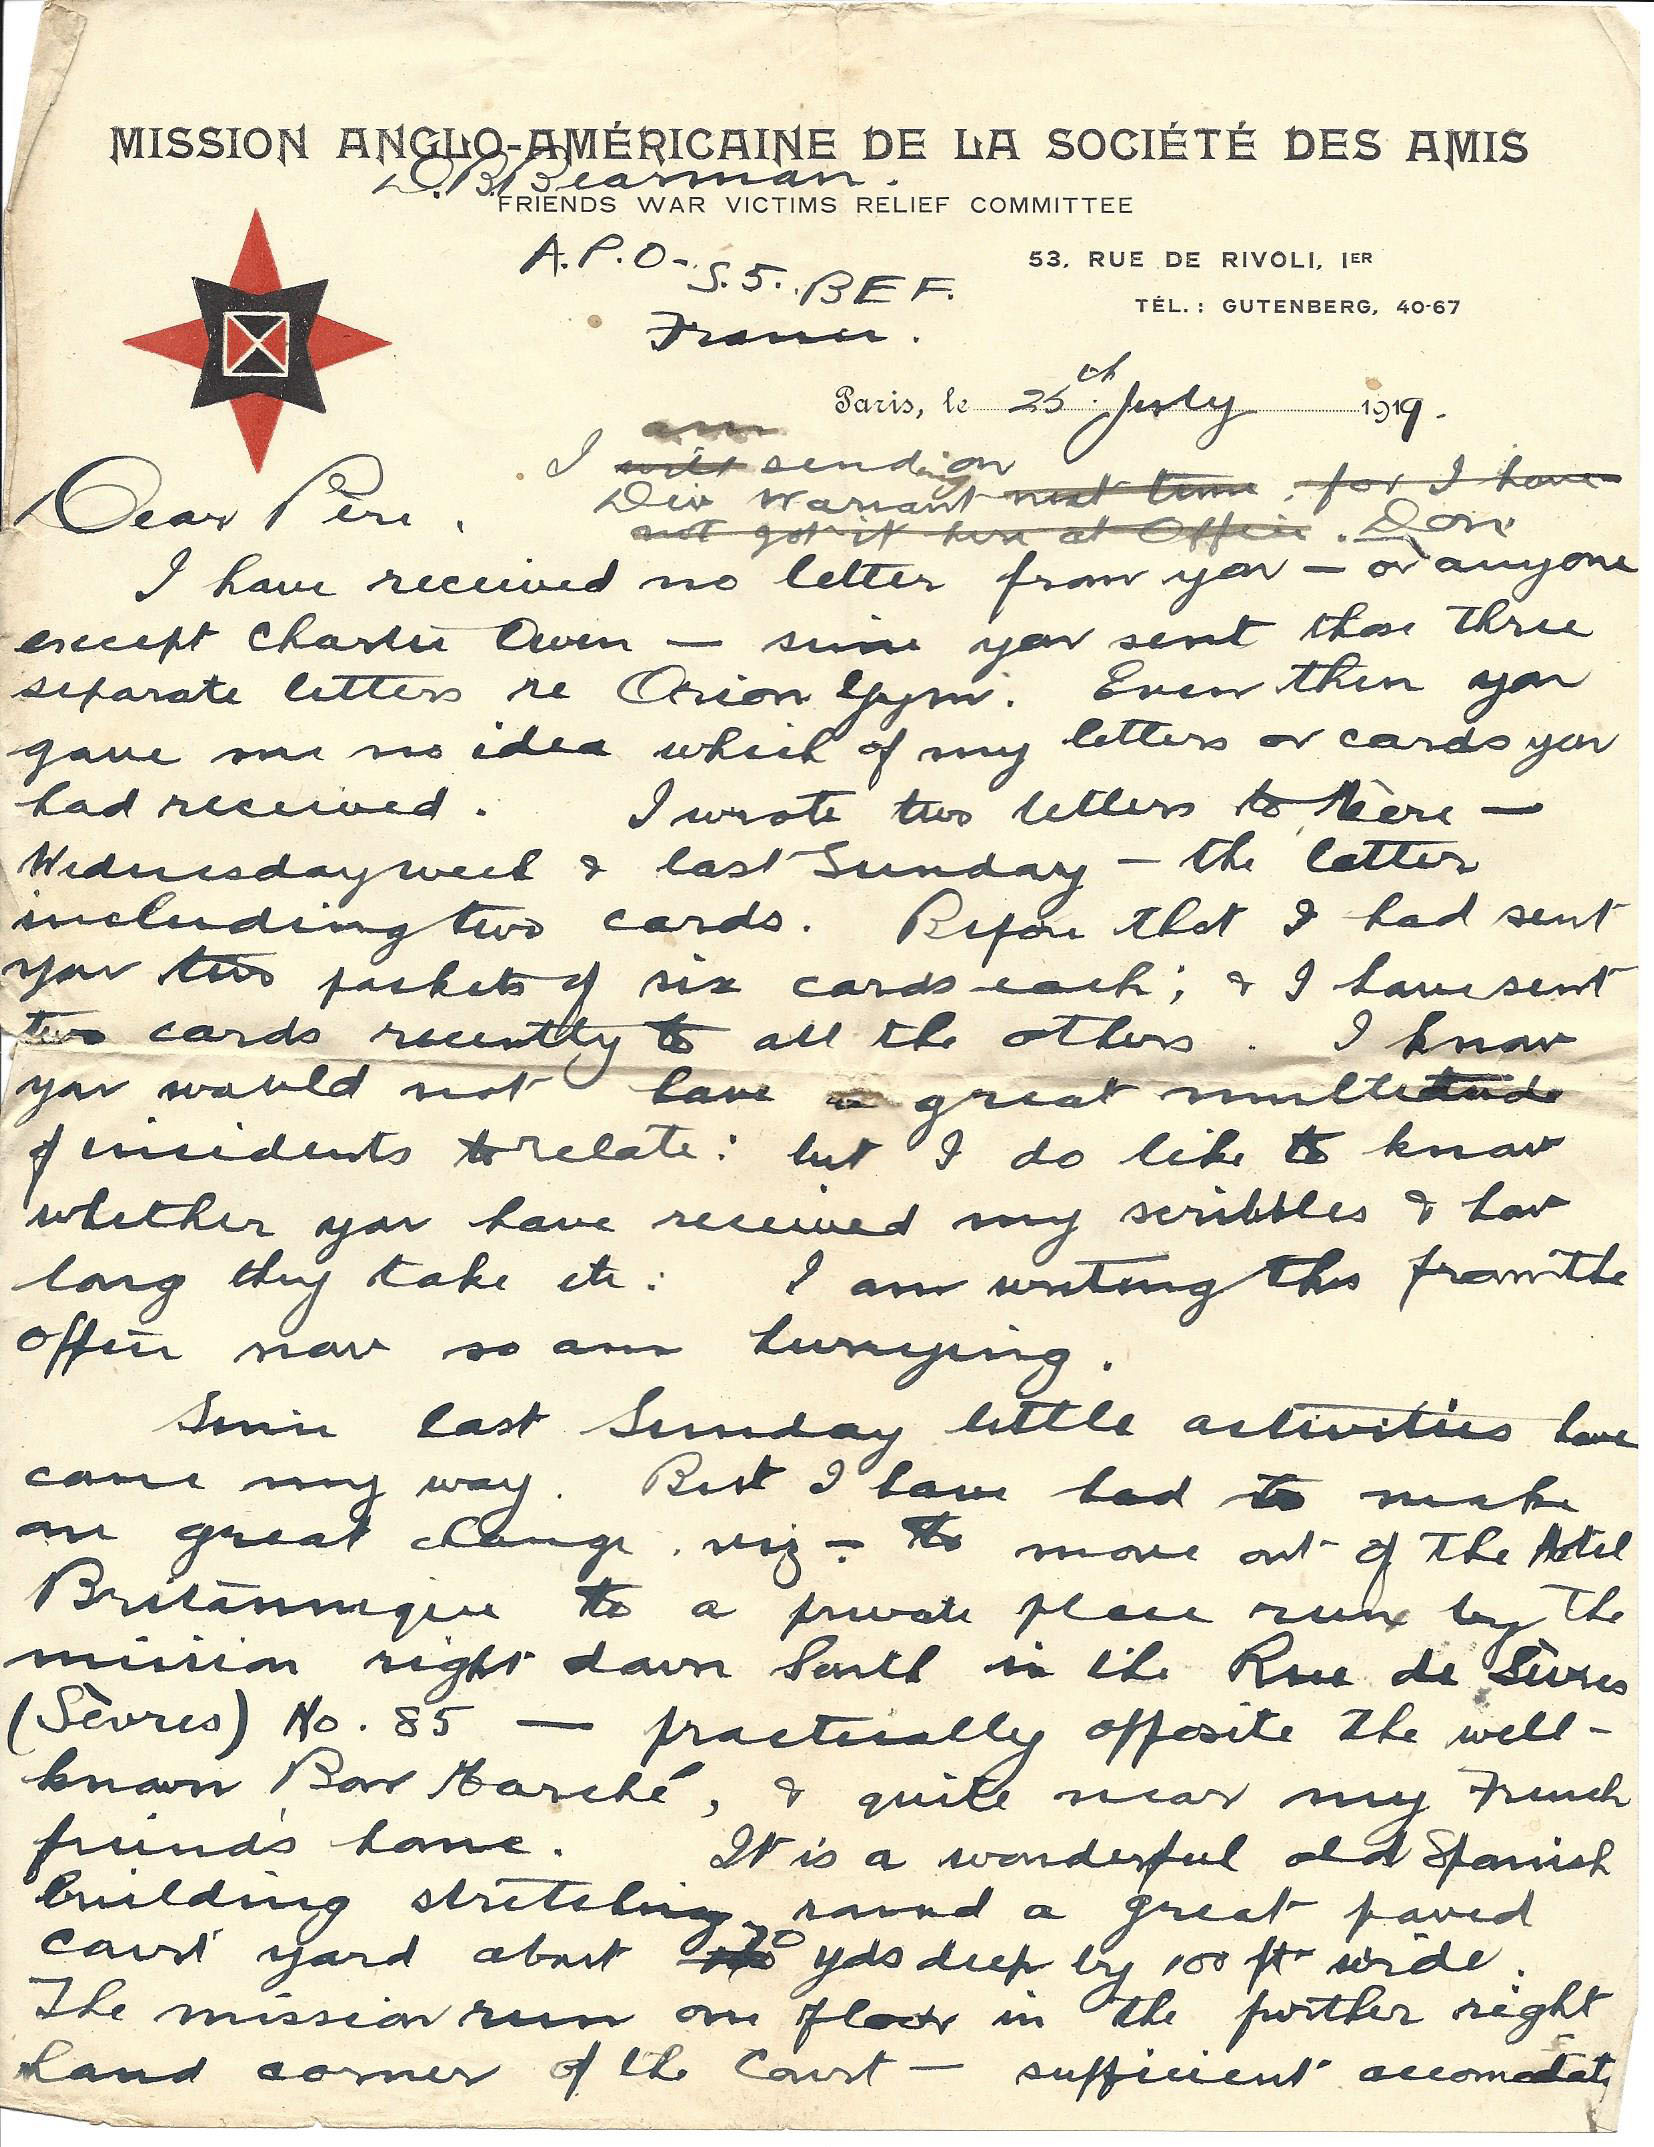 1919-07-25 p1 Donald Bearman letter to his father